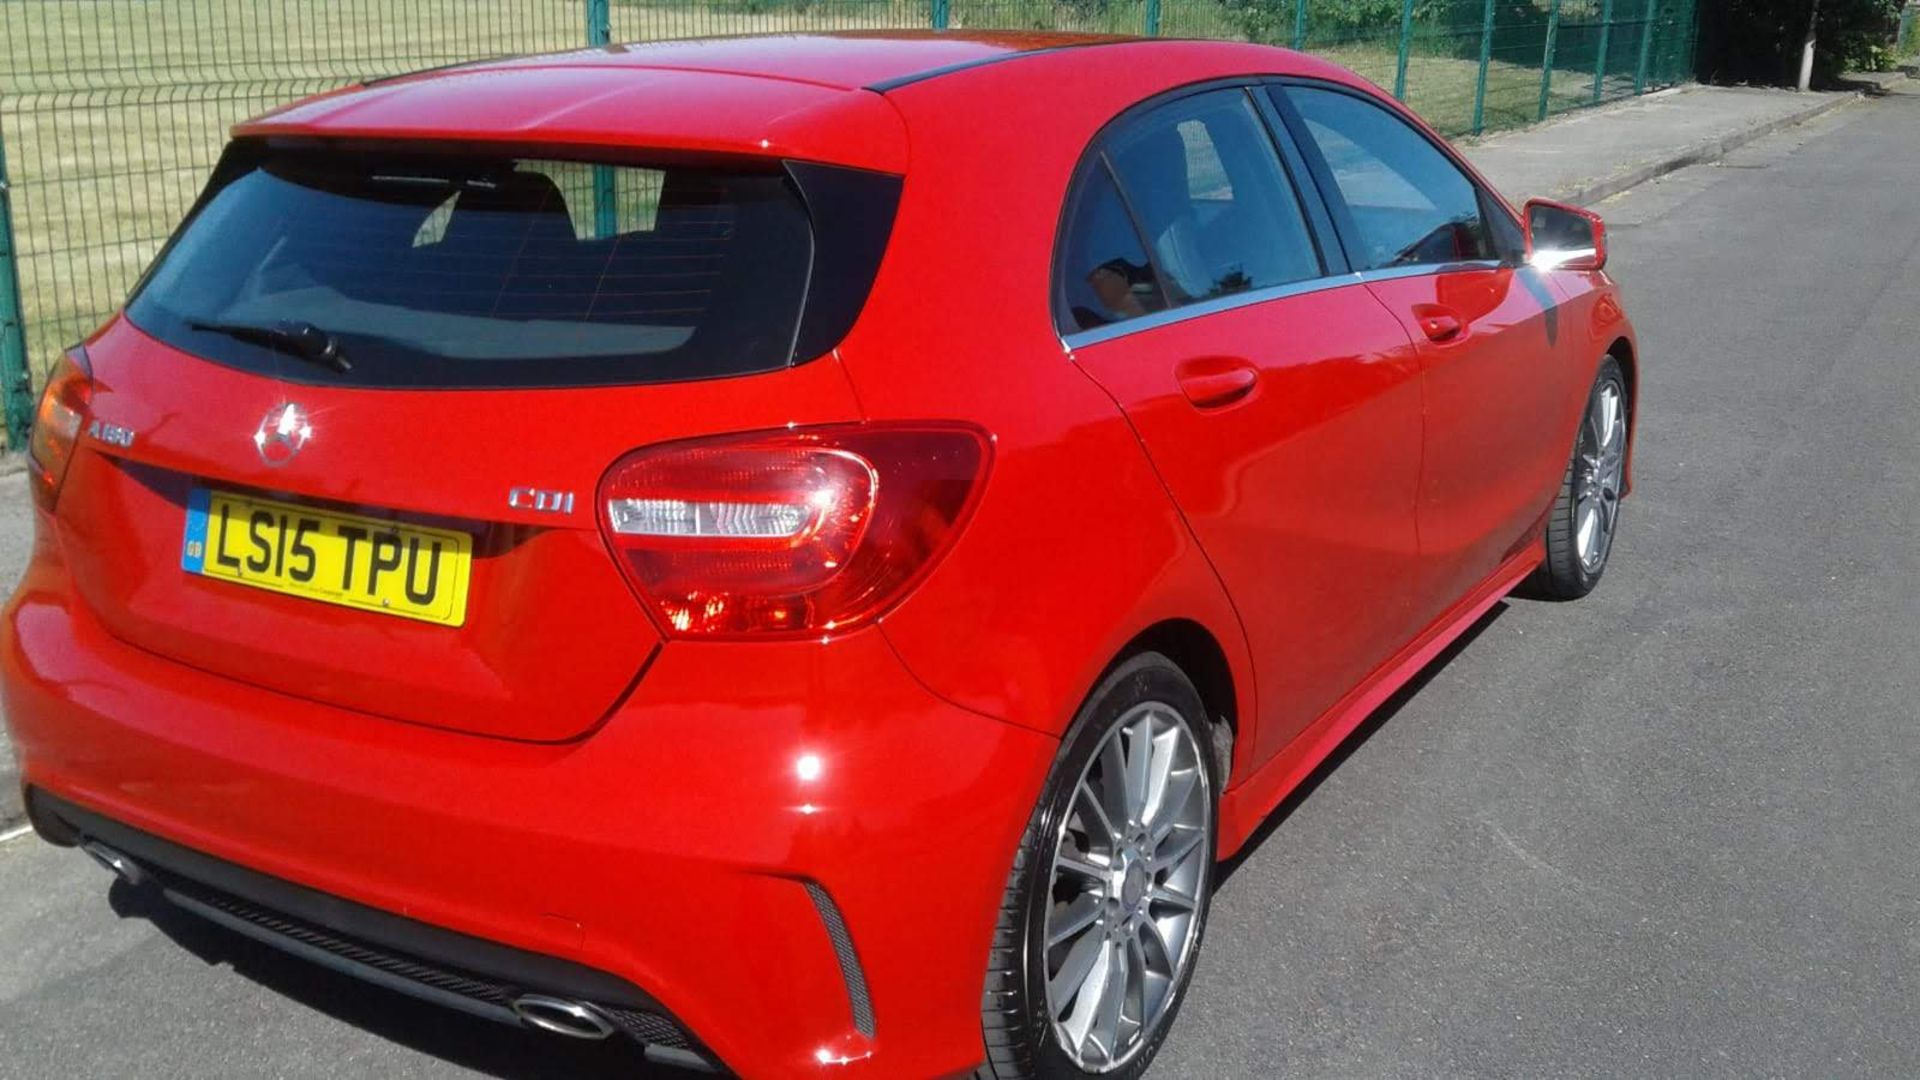 2015/15 REG MERCEDES-BENZ A180 BLUE EFFICIENCY AMG SPORT CDI 1.5 DIESEL, SHOWING 0 FORMER KEEPERS - Image 4 of 15